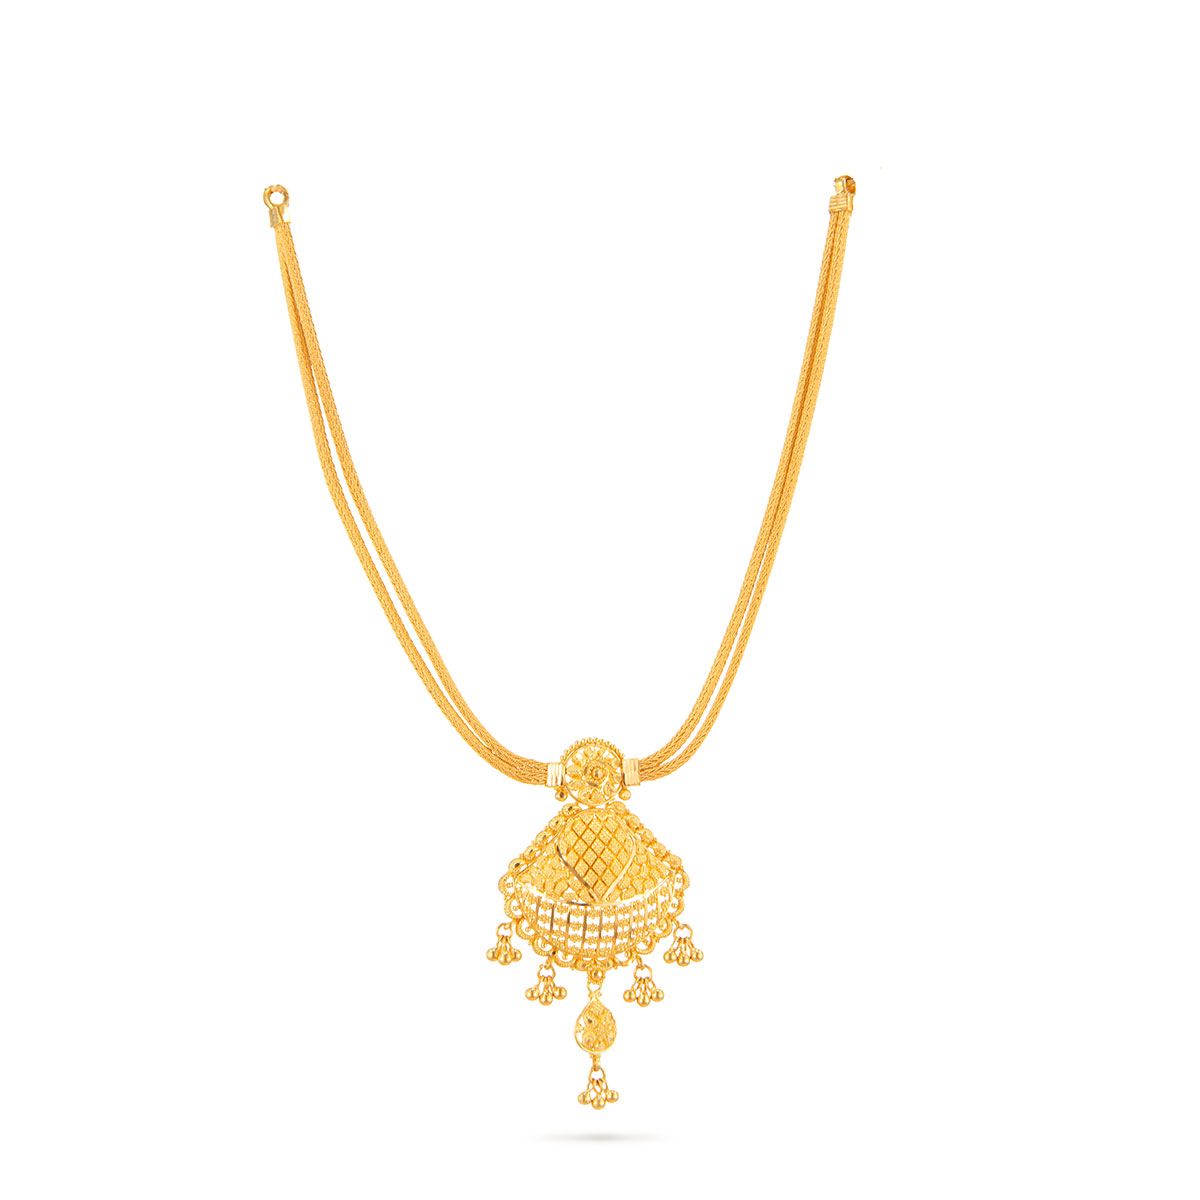 Shop Now collection of Layered Necklace @ Best Price